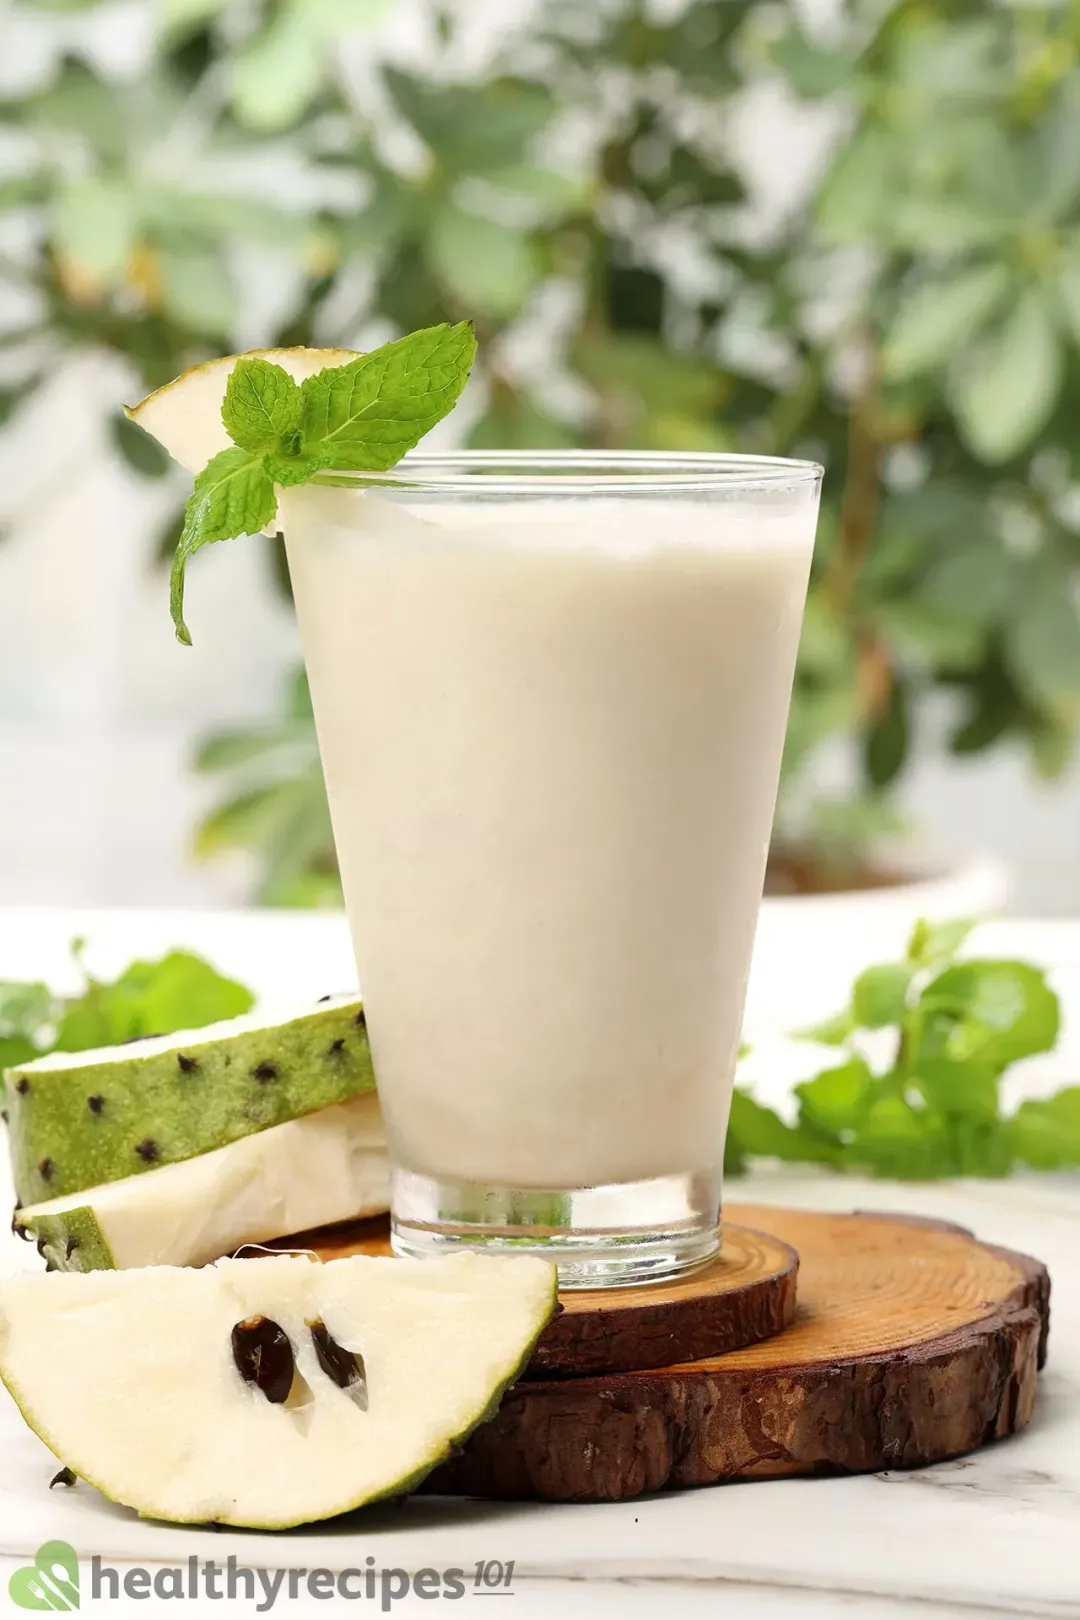 A glass of soursop juice garnished with mints and a soursop wedge, next to more soursop wedges and mints